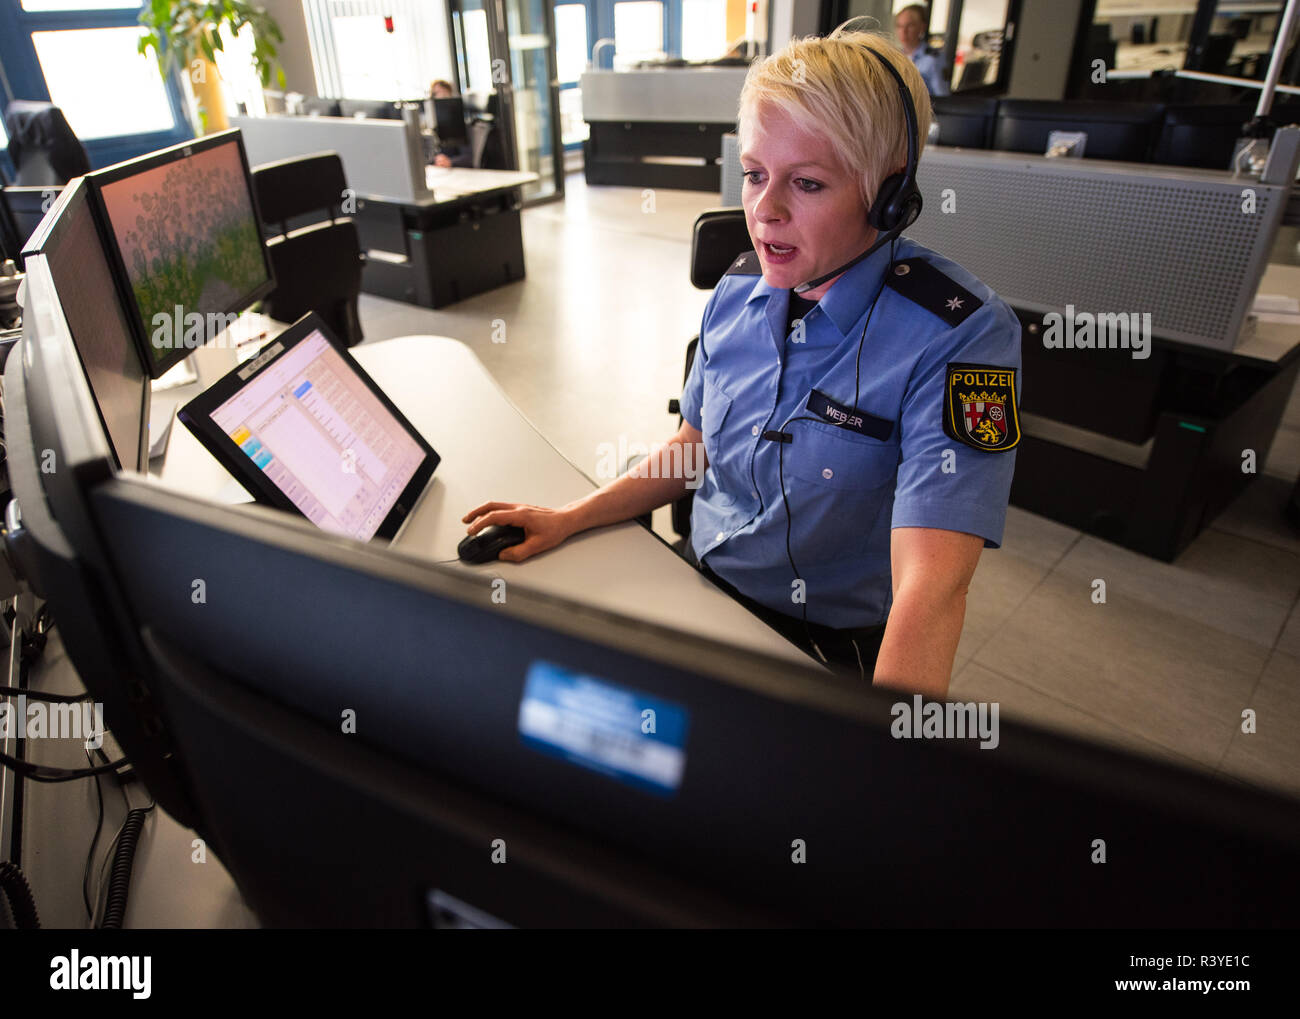 Mainz, Germany. 17th Oct, 2018. Anna Weber, police commissioner and radio  announcer, sits in the command centre at her workplace and answers an  emergency call. The command and control centre in the